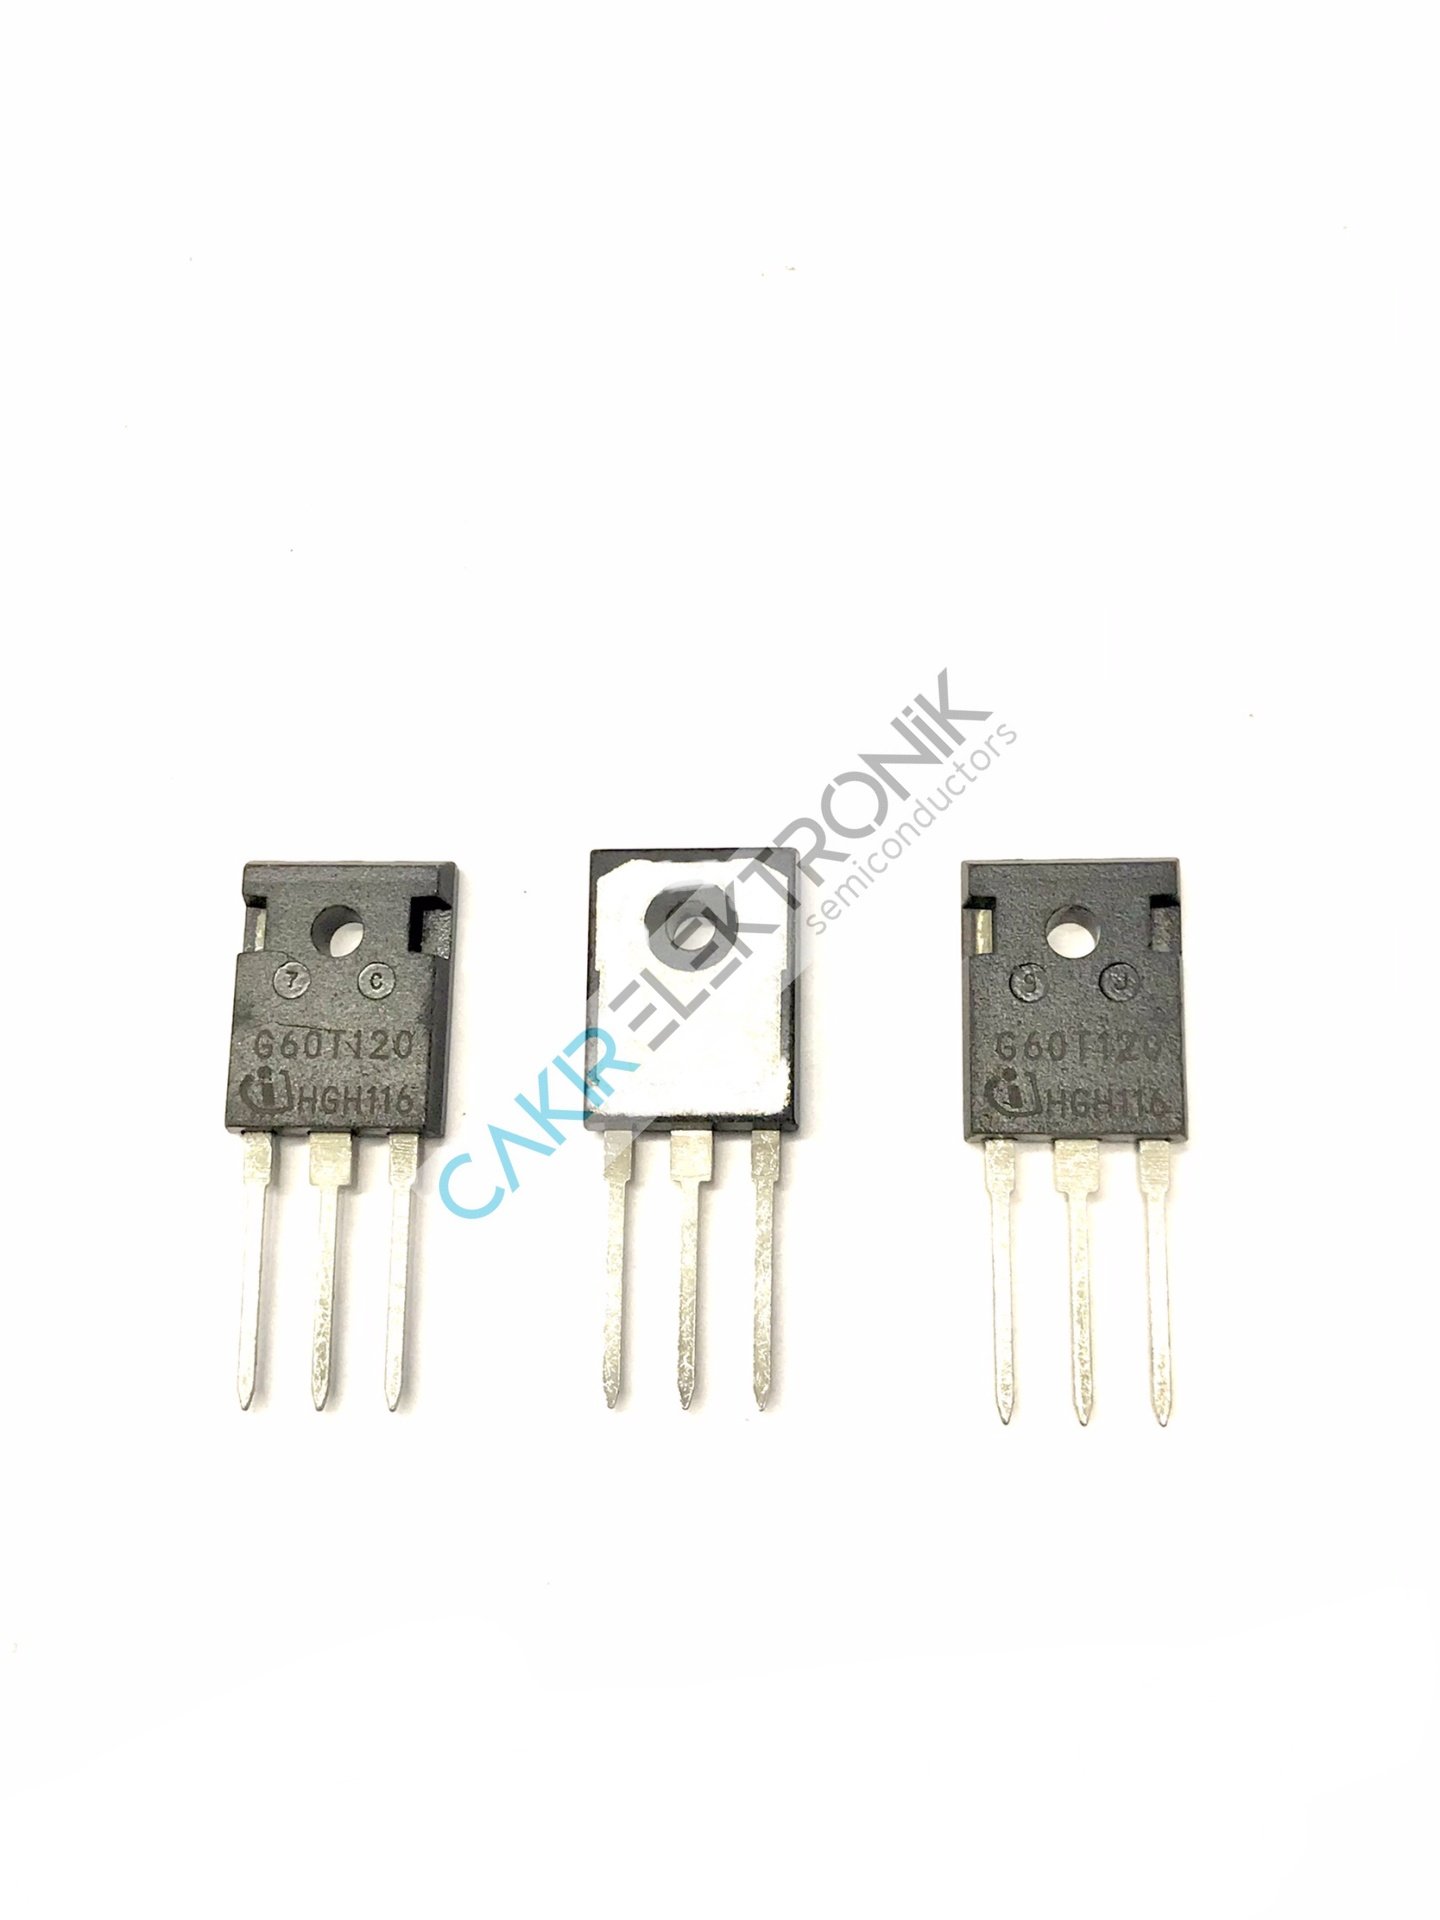 IGW60T120 - G60T120 - TO-247 - 60A. 1200V IGBT